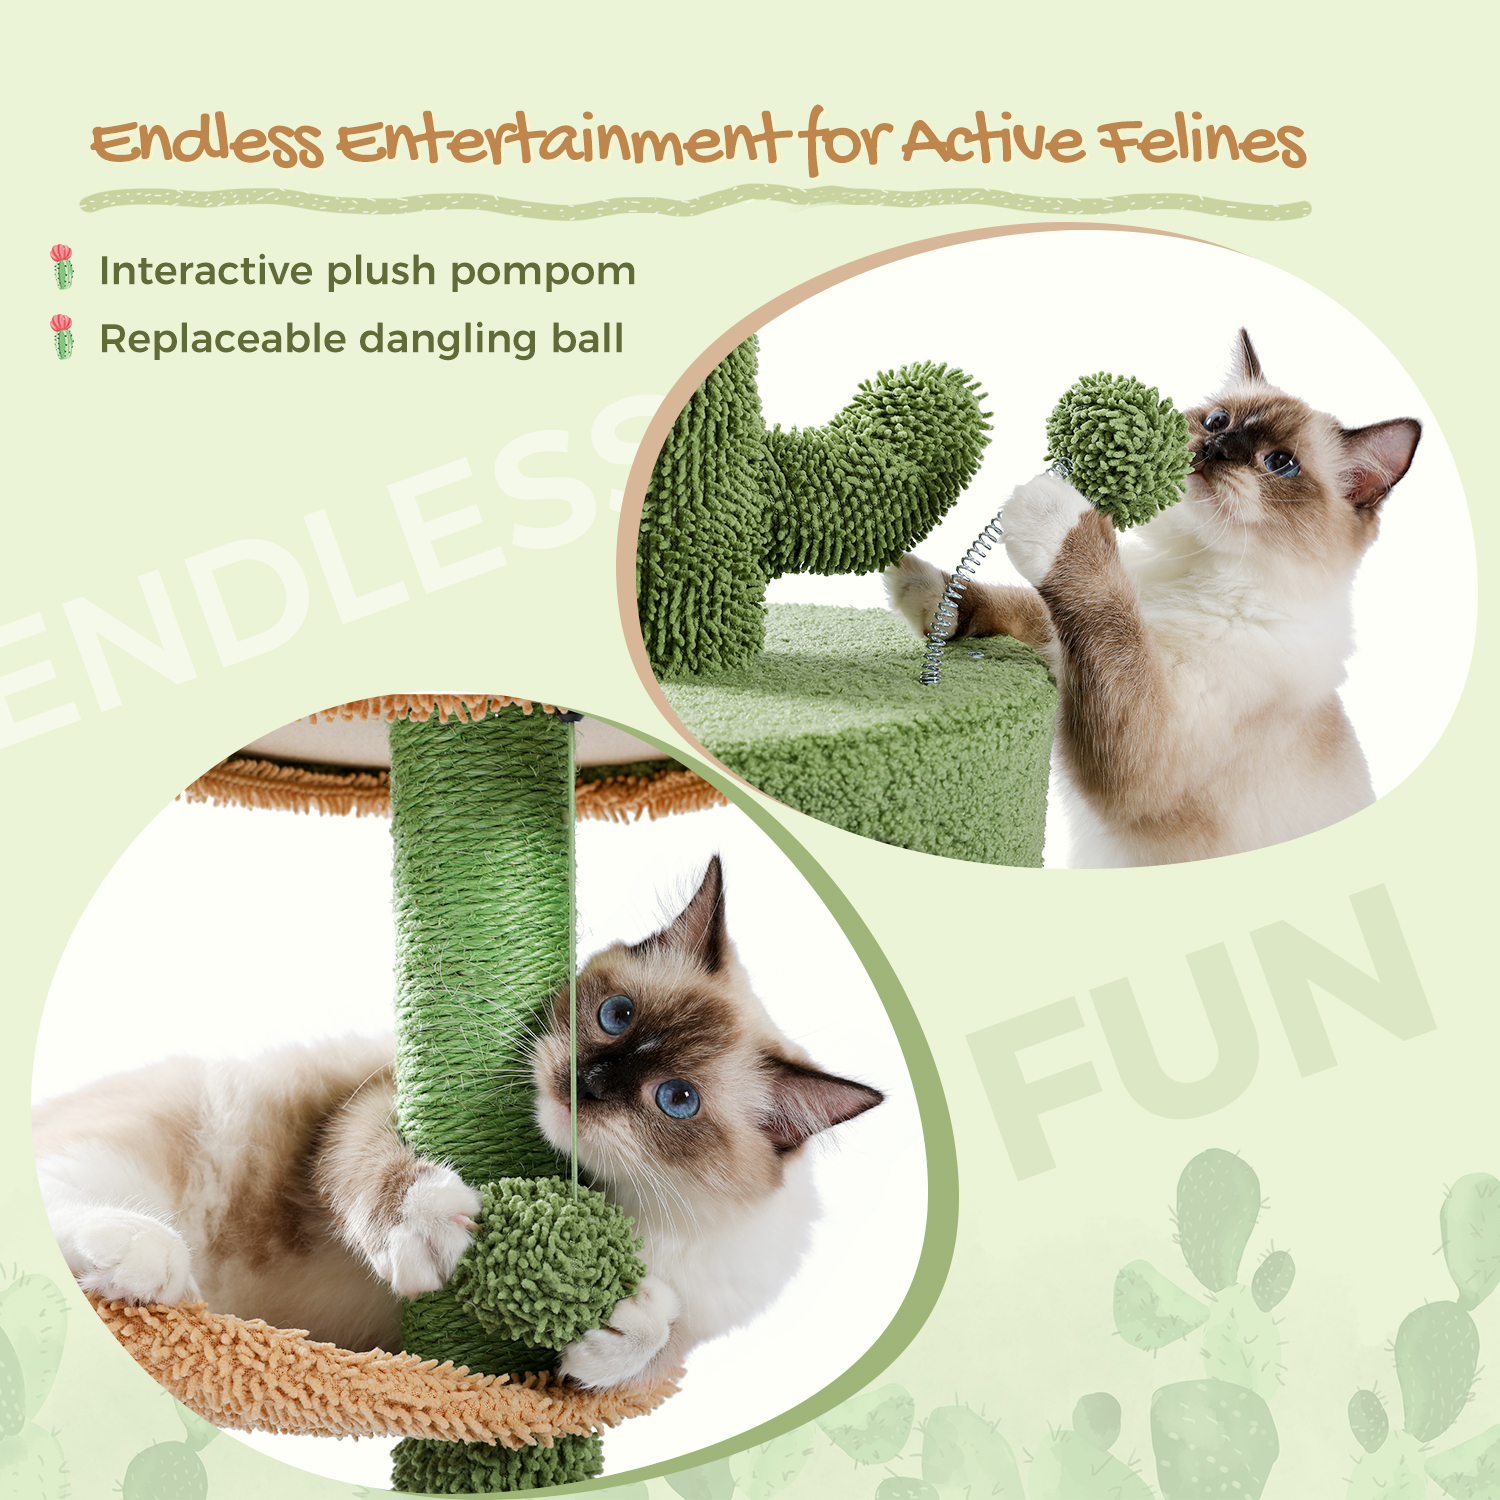 Cactus Cat Tree for Small Cats, Green